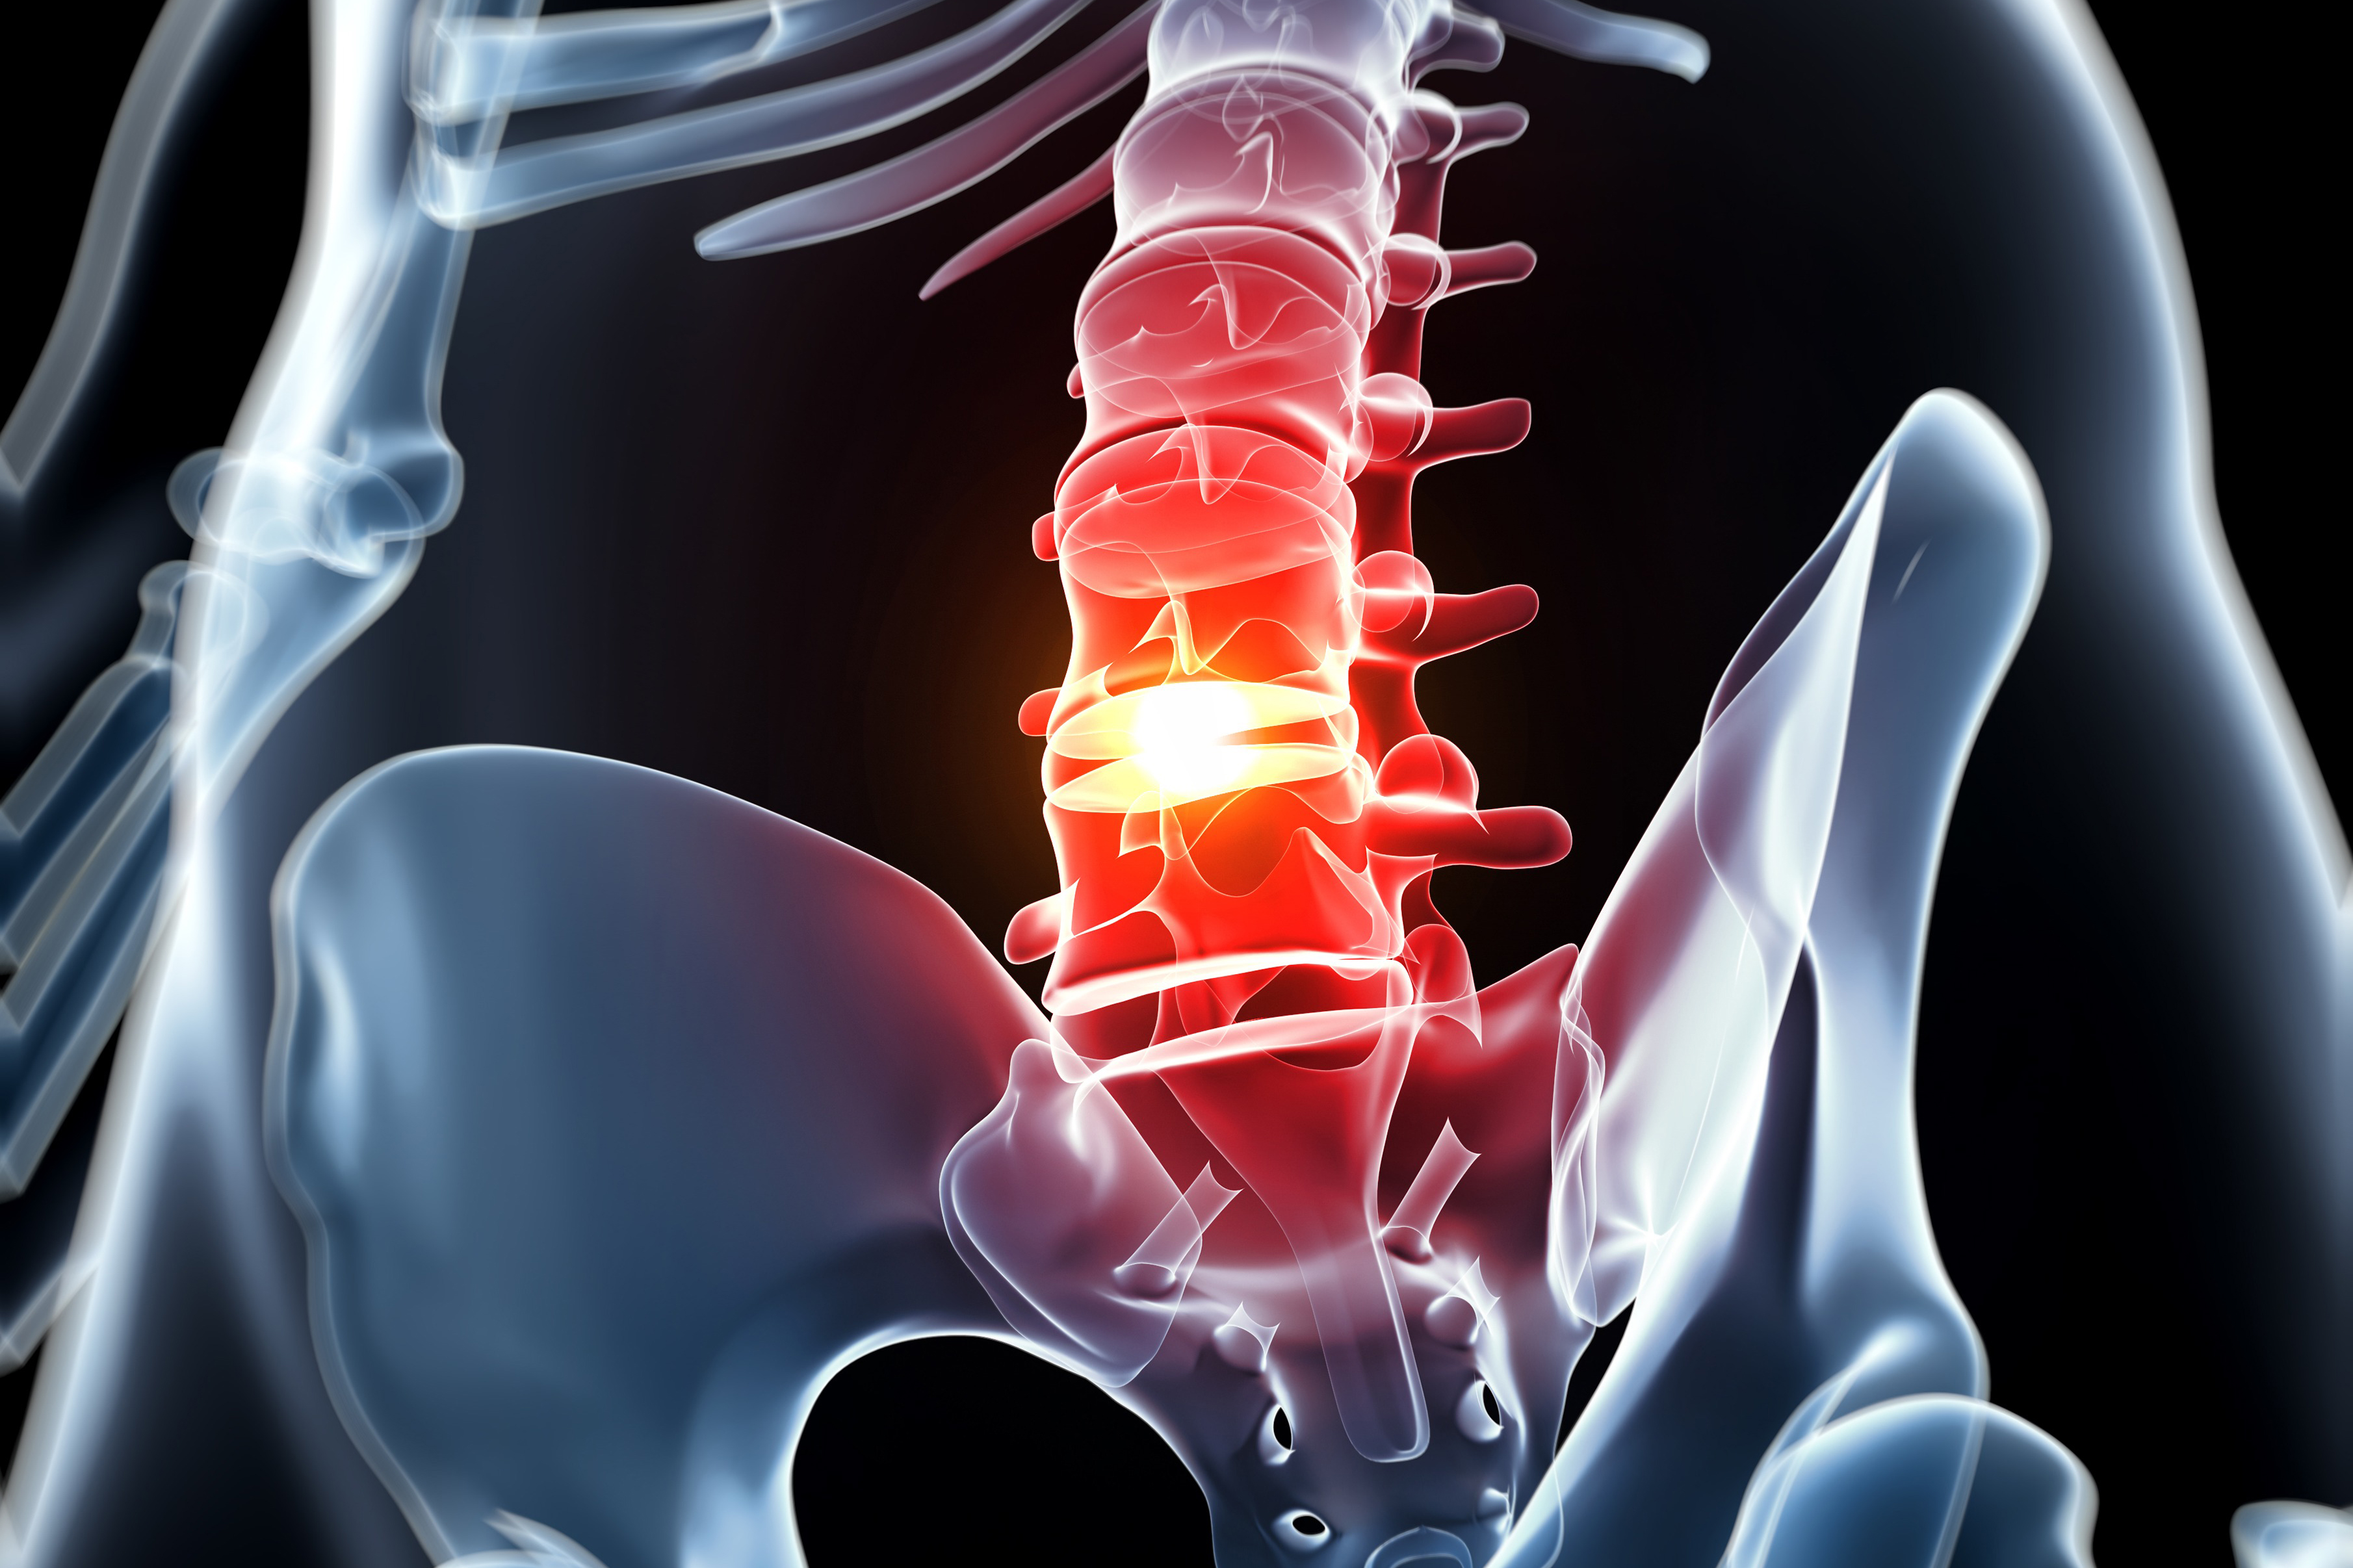 Human spine with slipped disc, computer artwork